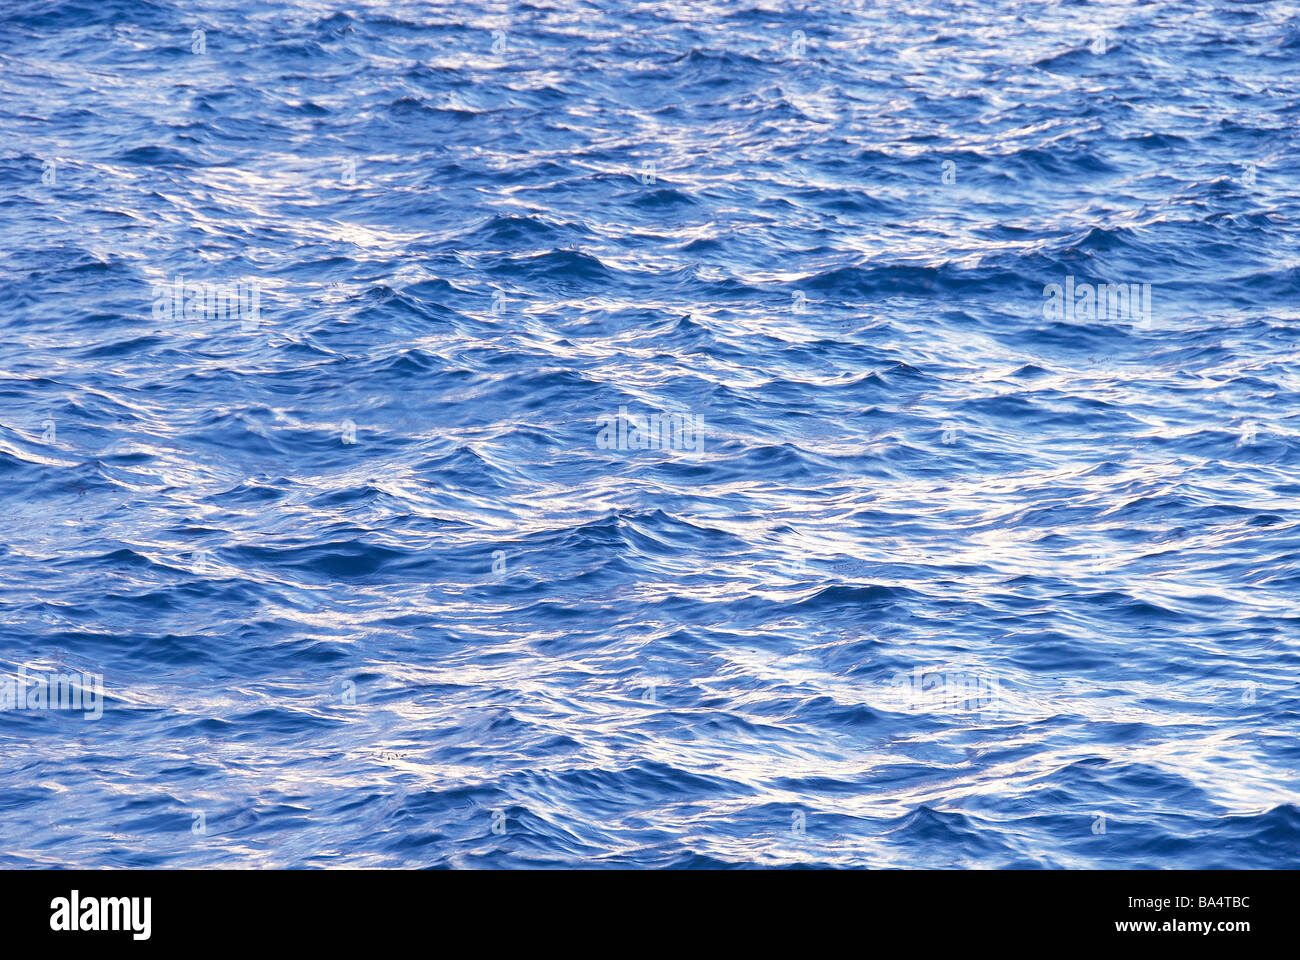 Tranquil Scene of Sea at Okinawa Prefecture,Japan Stock Photo